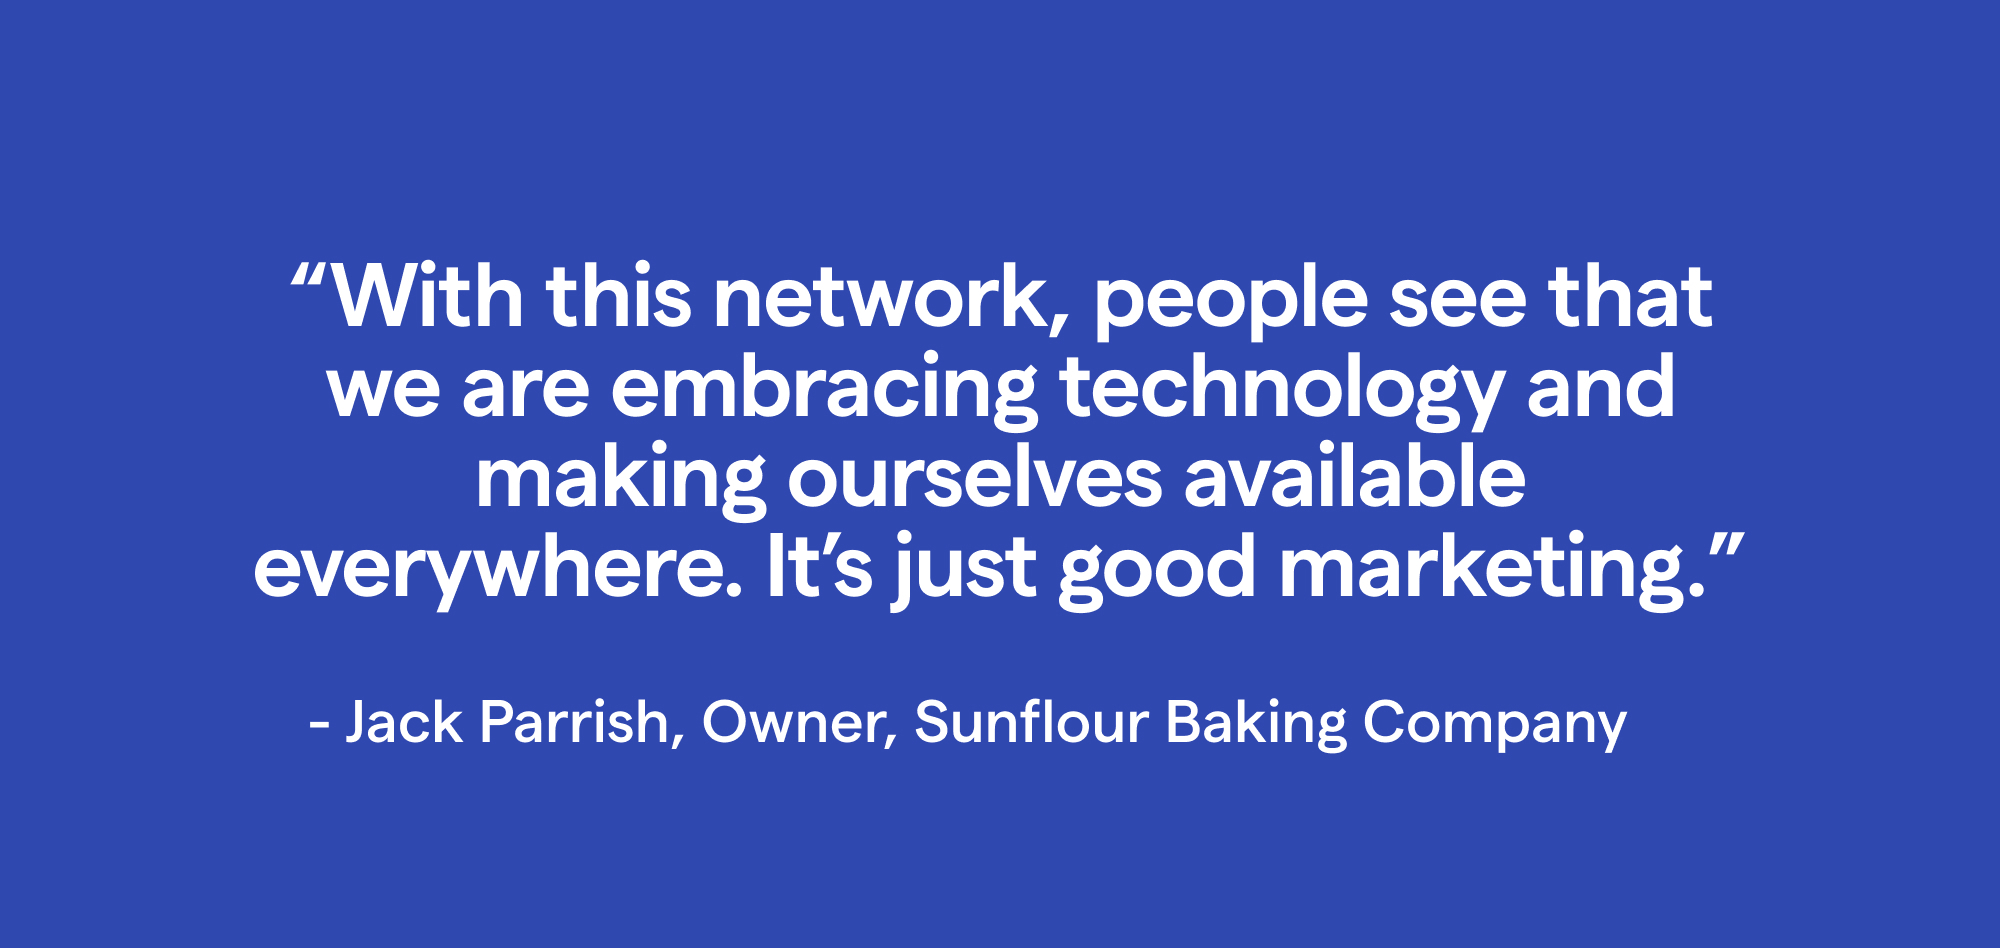 A quote from Jack Parrish, owner of Sunflour Baking Company - With this network, people see that we are embracing technology and making ourselves available everywhere. It's just good marketing.